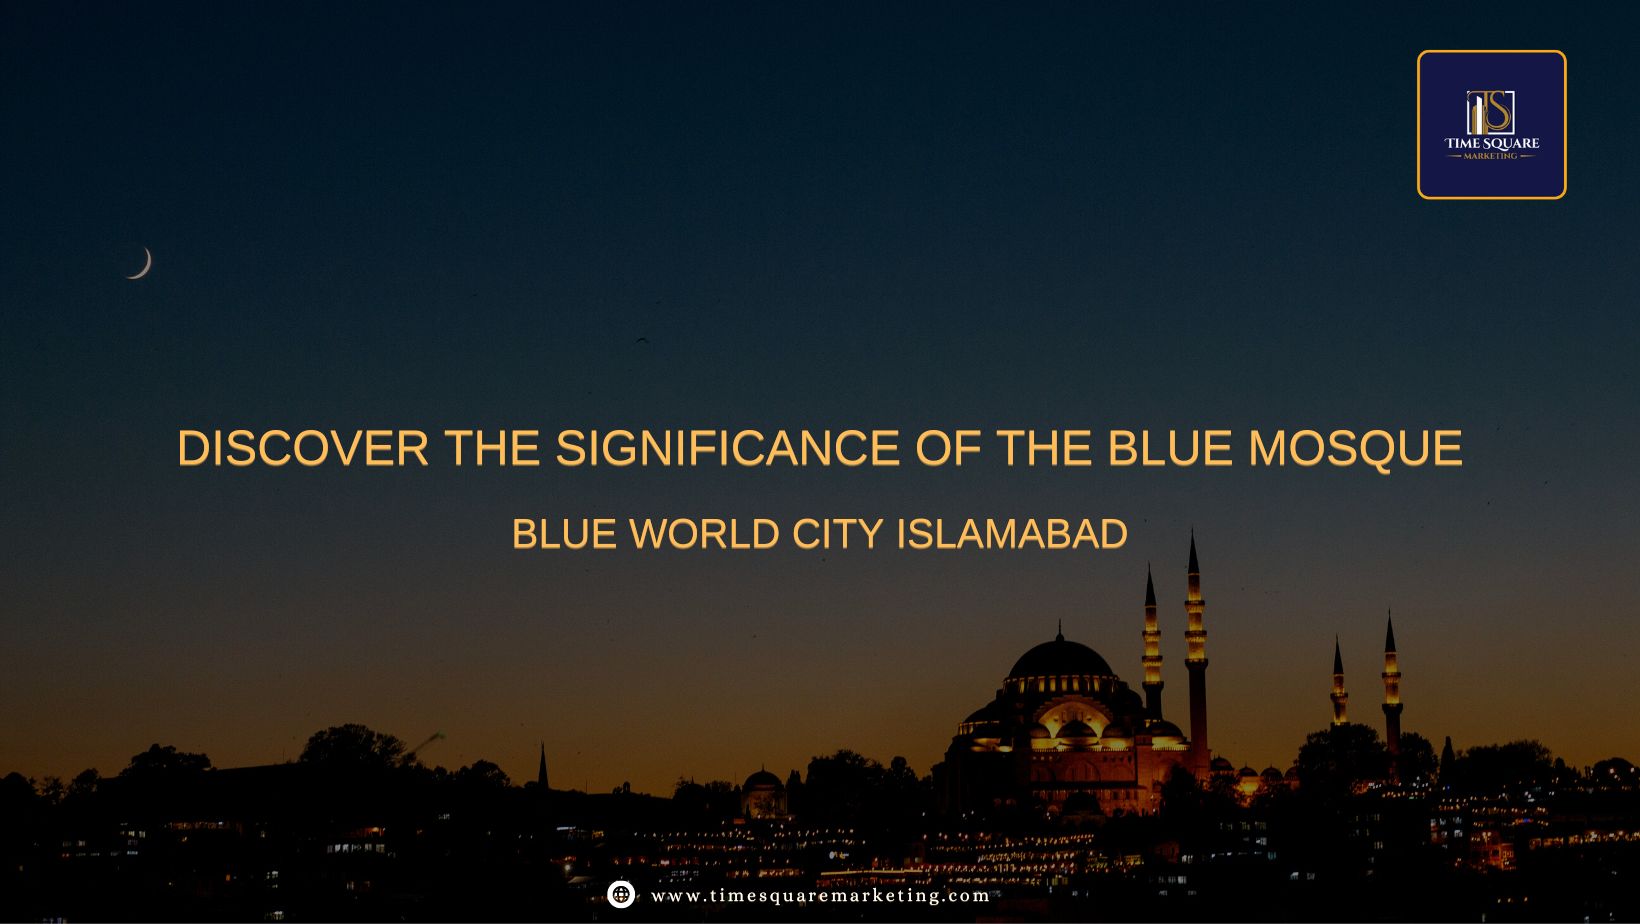 Blue Mosque in Blue World City Islamabad